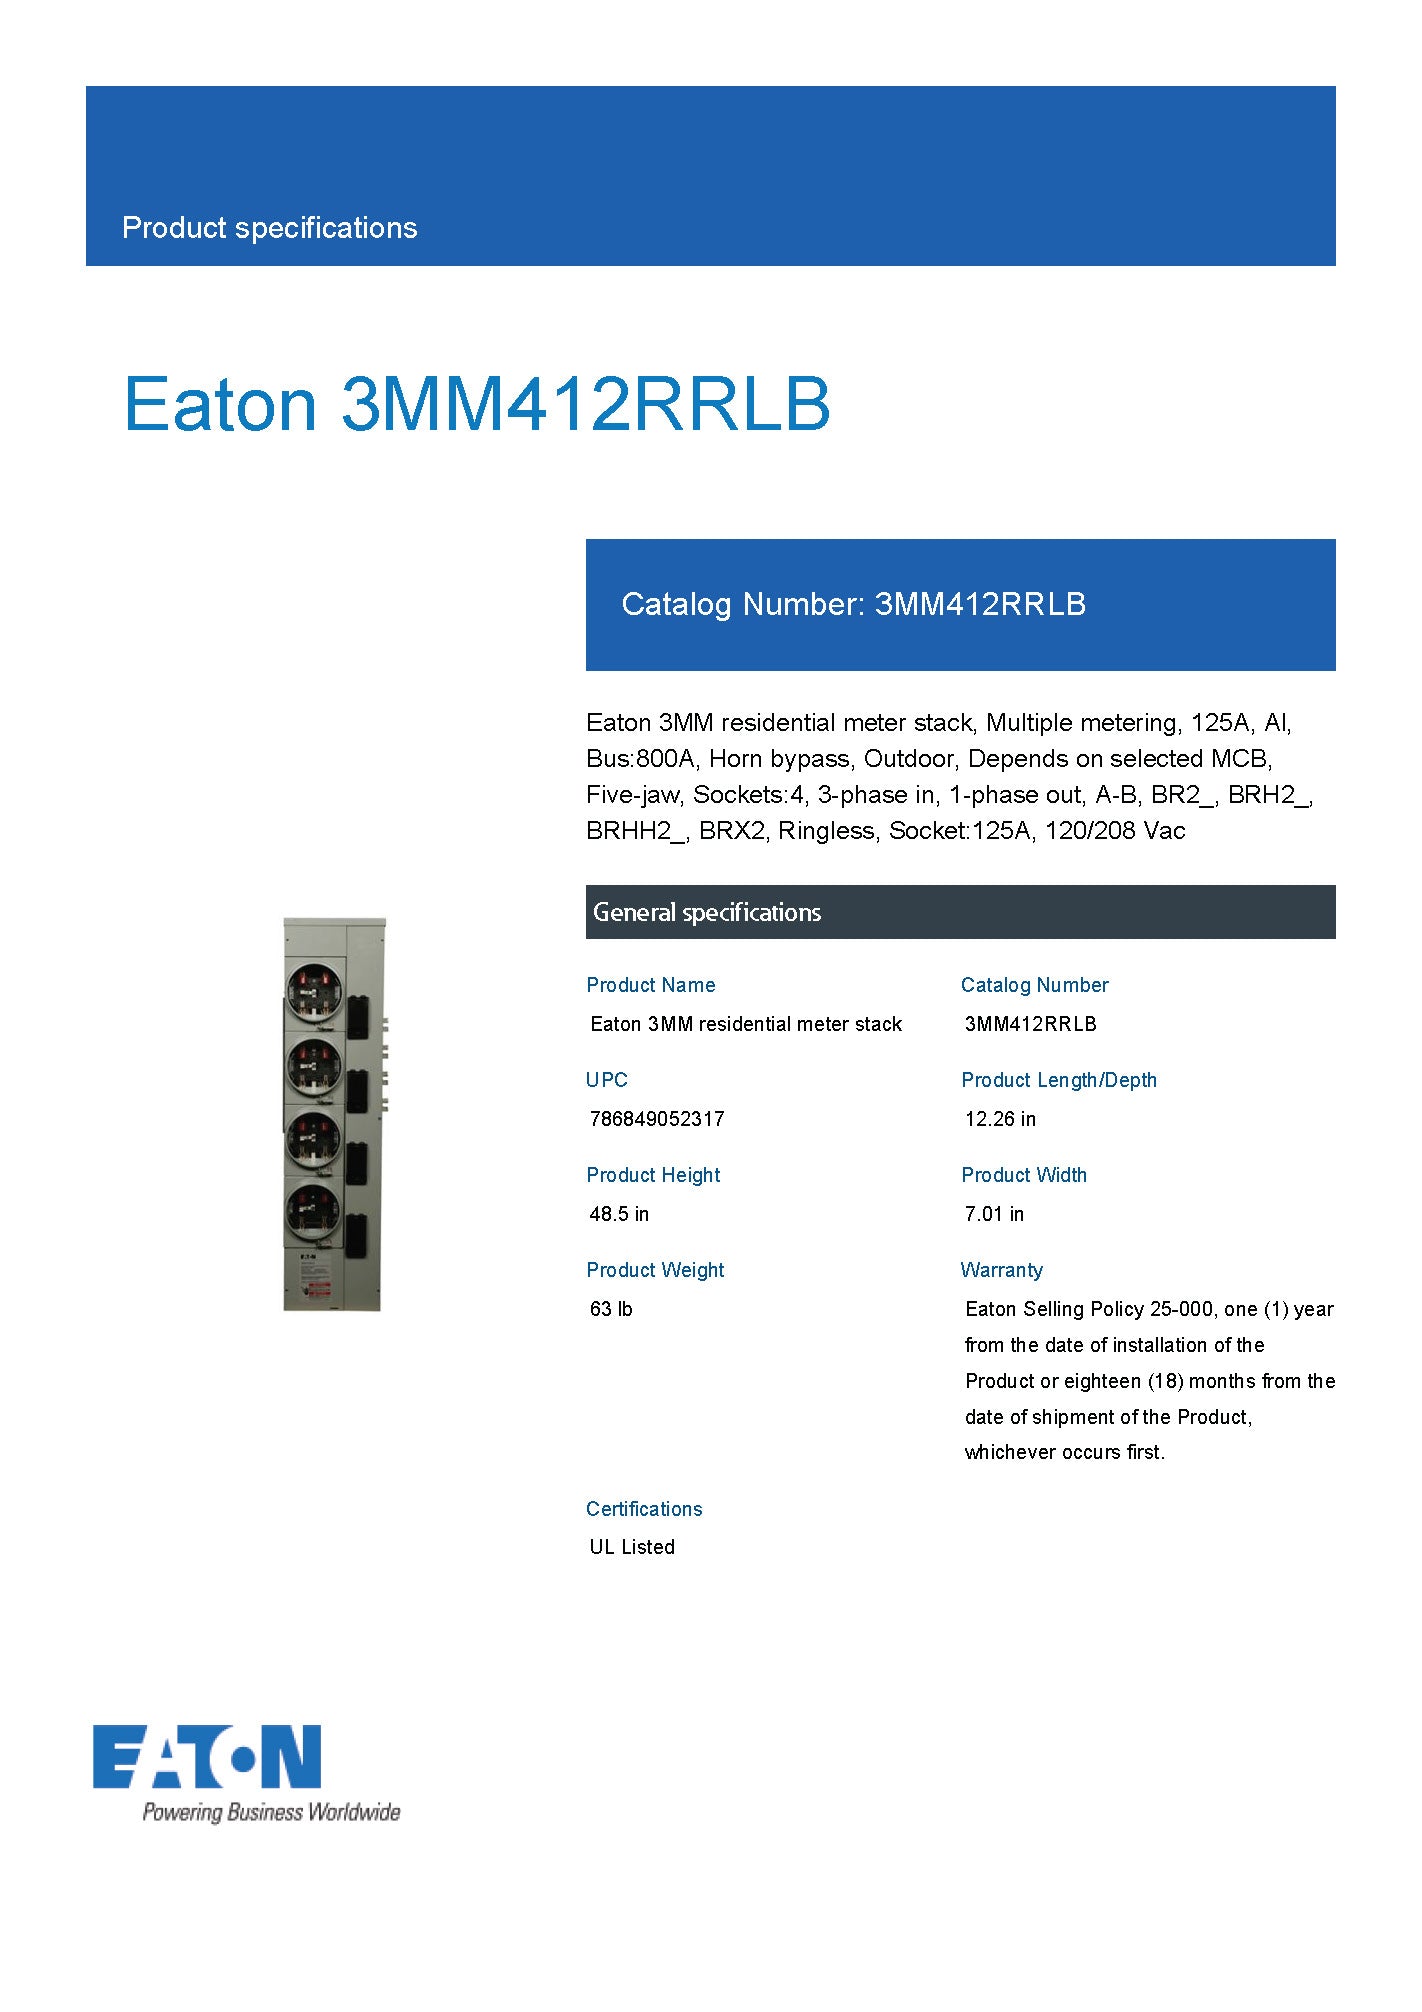 Eaton 3MM412RRLB 3PH In / Single Phase Out 4 Gang 125A Socket Ringless Horn Bypass Meter Stack